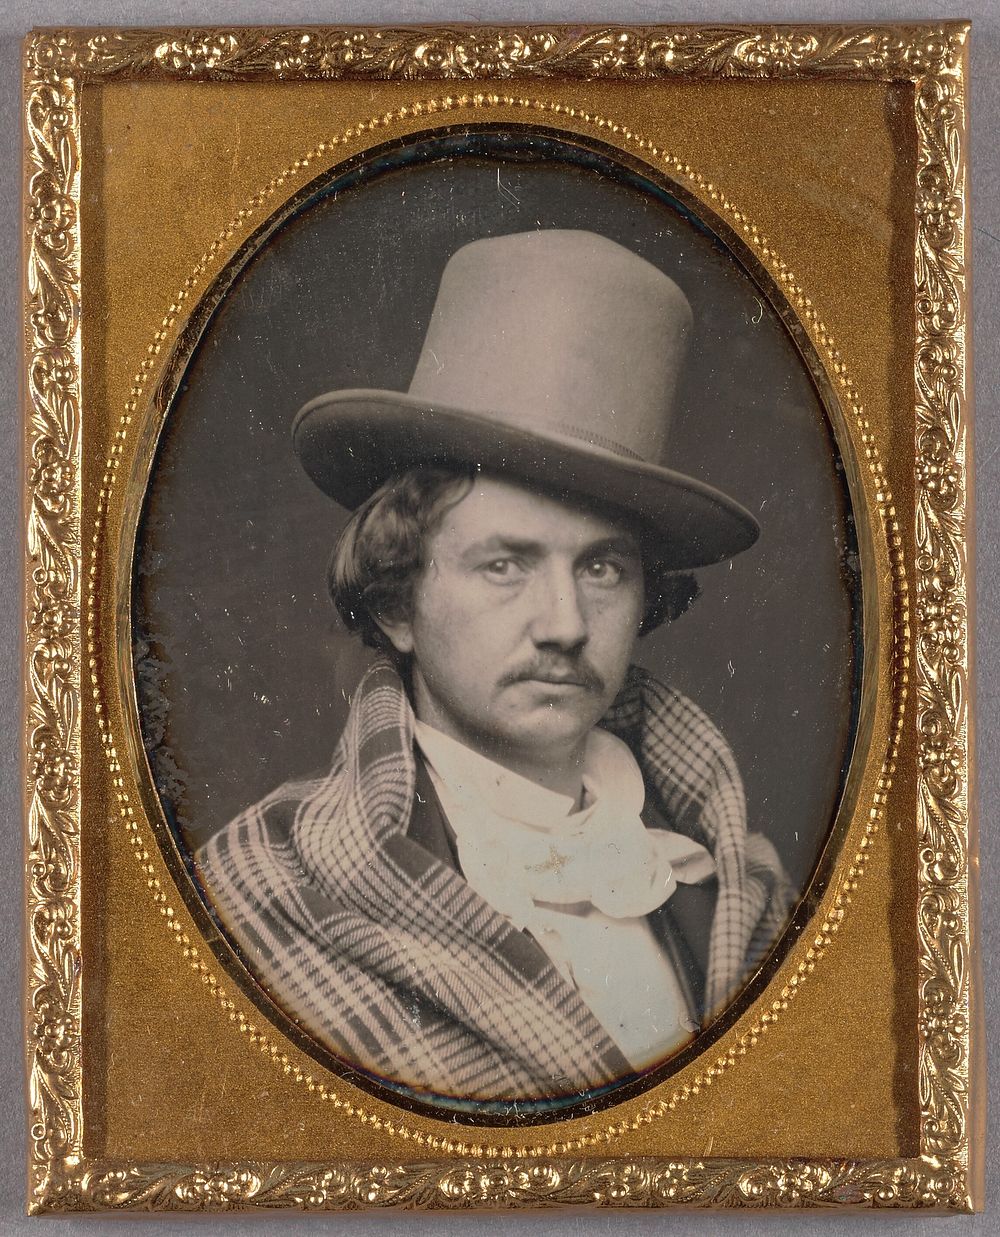 Portrait of a Moustachioed man wearing a large, tall hat